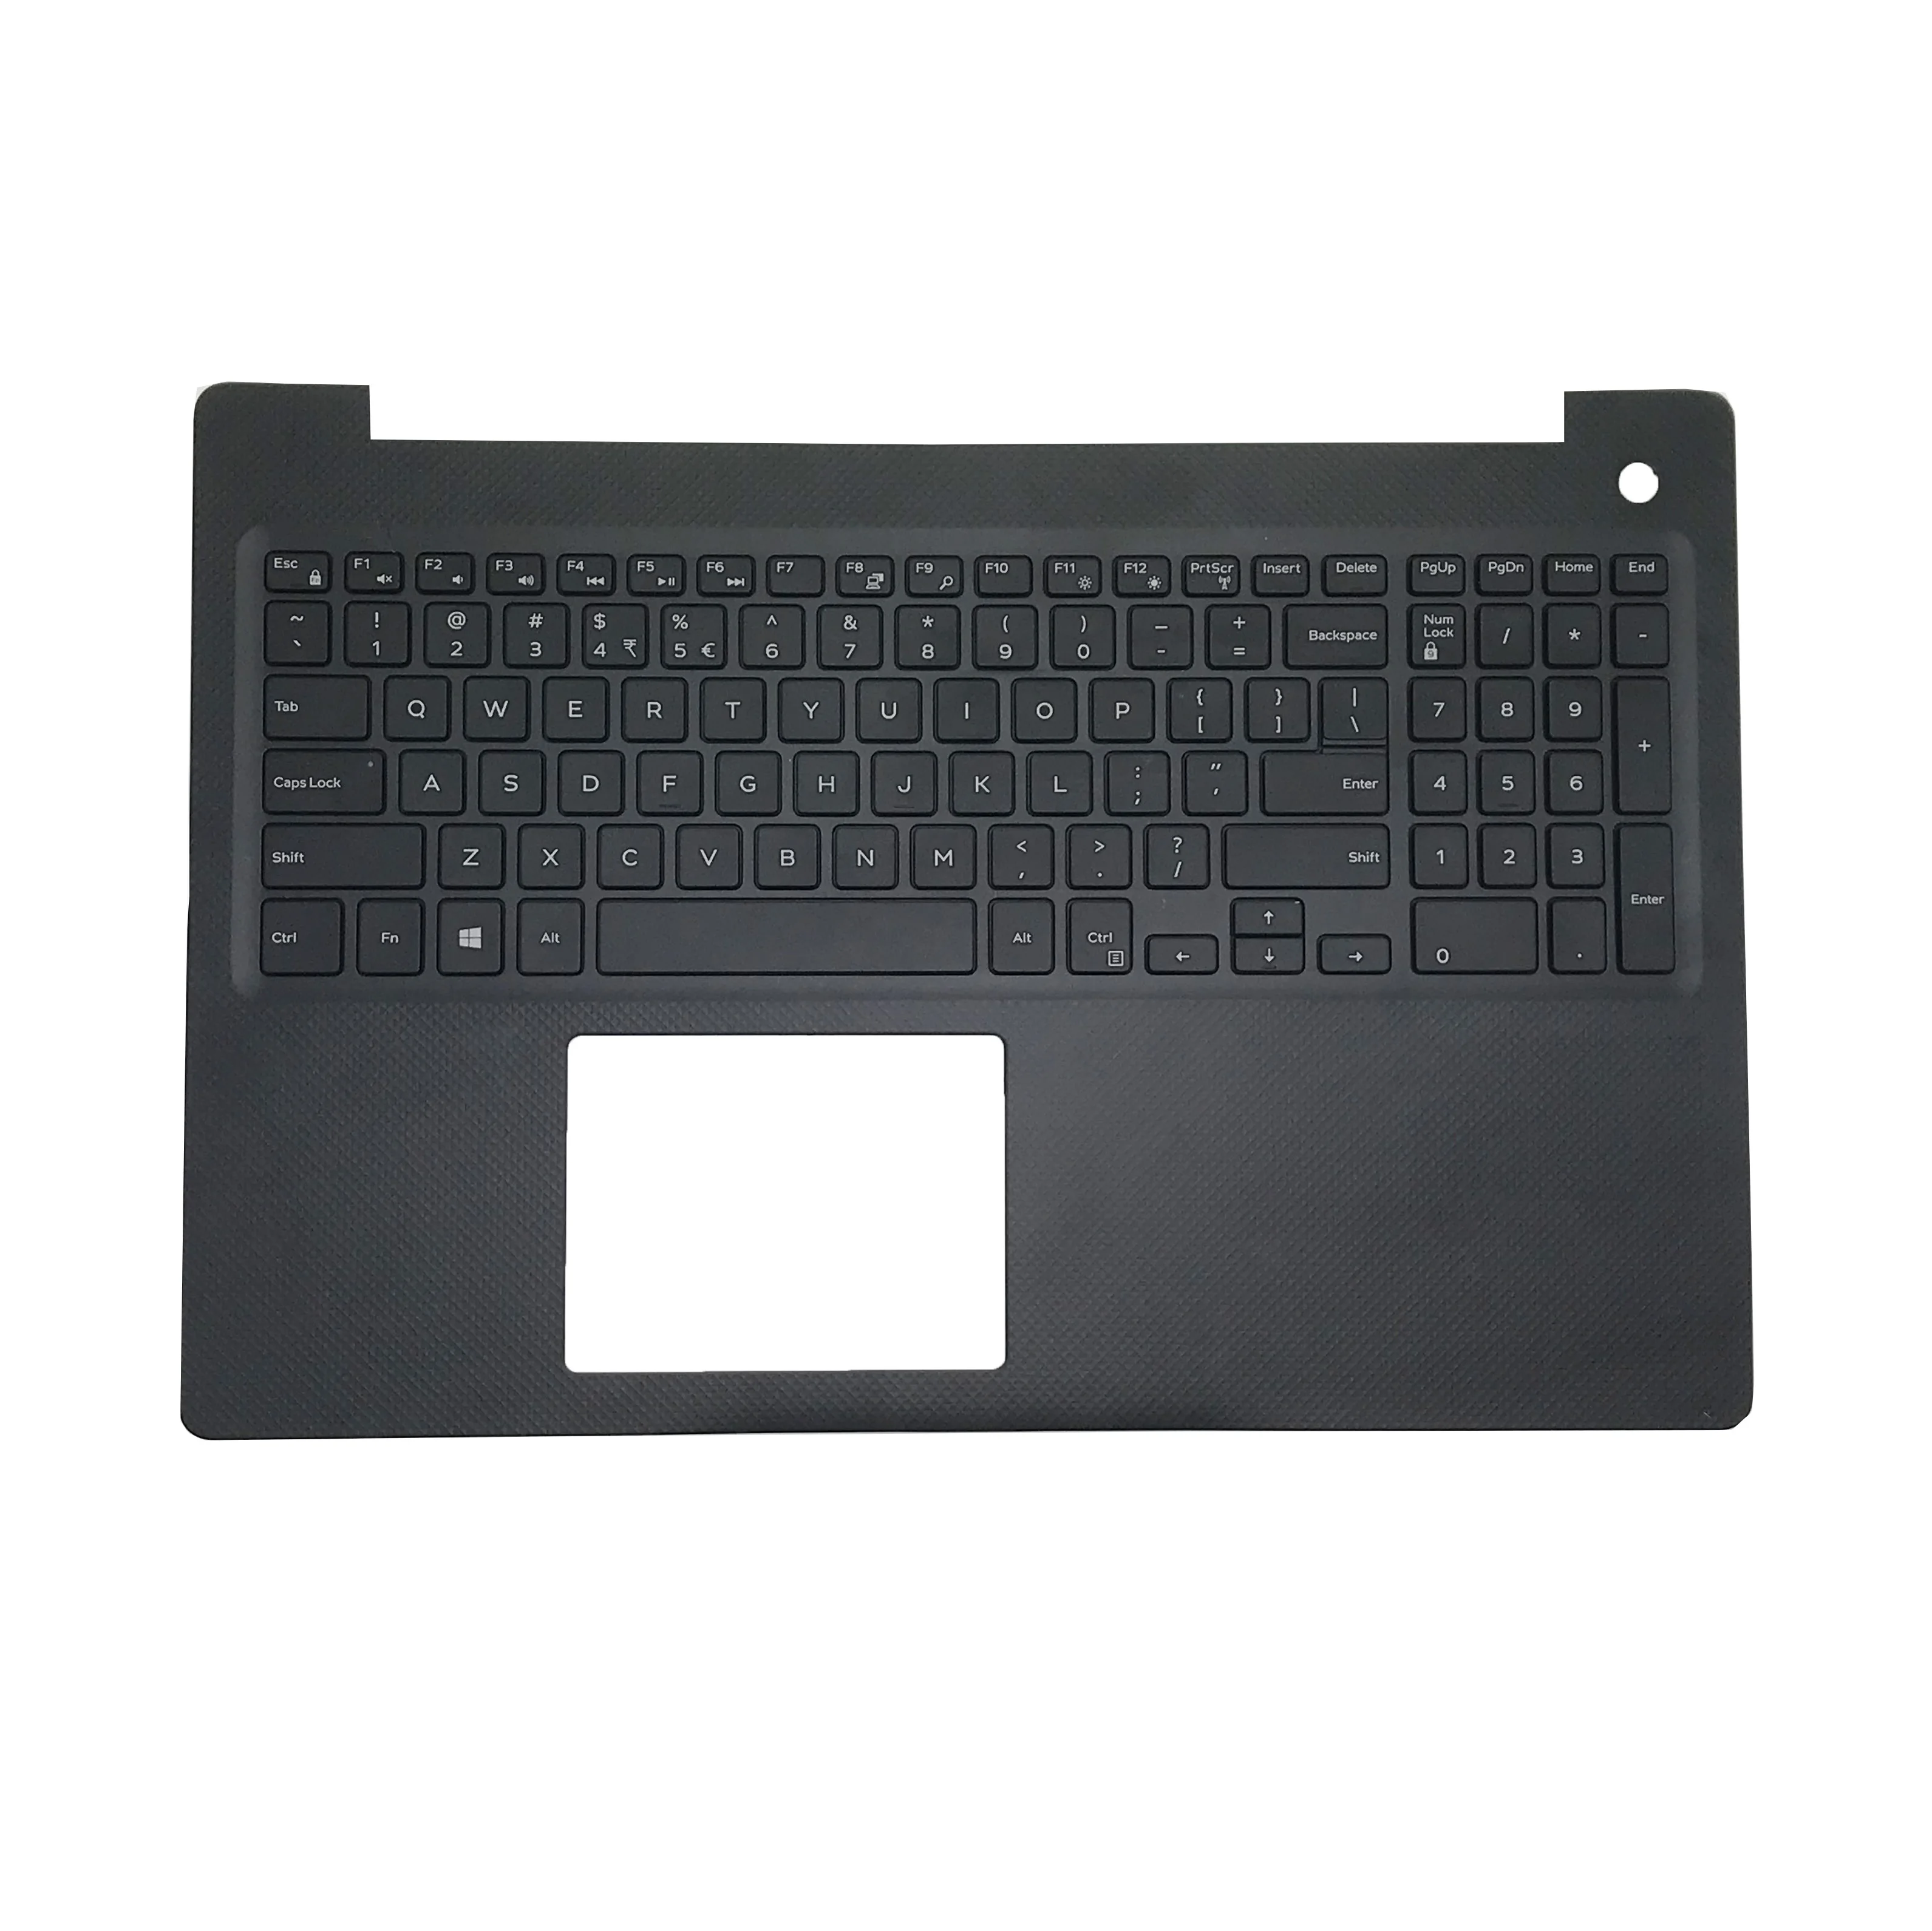 Original New US Keyboard for Dell Inspiron 3582 3583 3585 Palmrest Top Cover Upper Case Keyboard US English 082KD3 086HKP